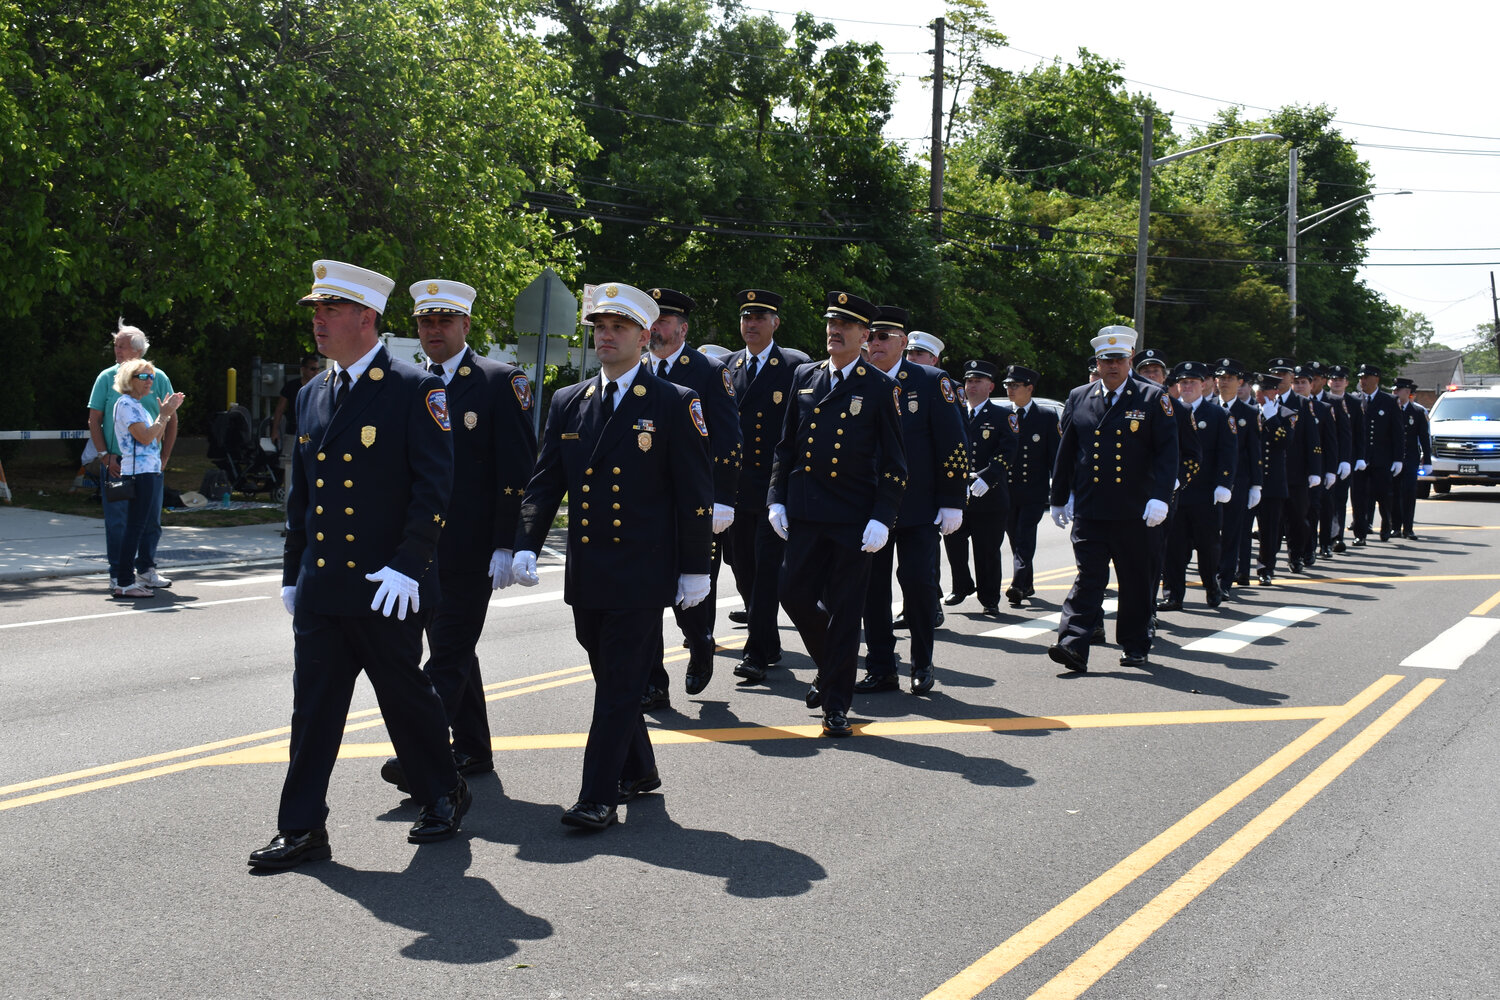 Members of the Merrick Fire Department marched in Merrick’s Memorial Day Parade.